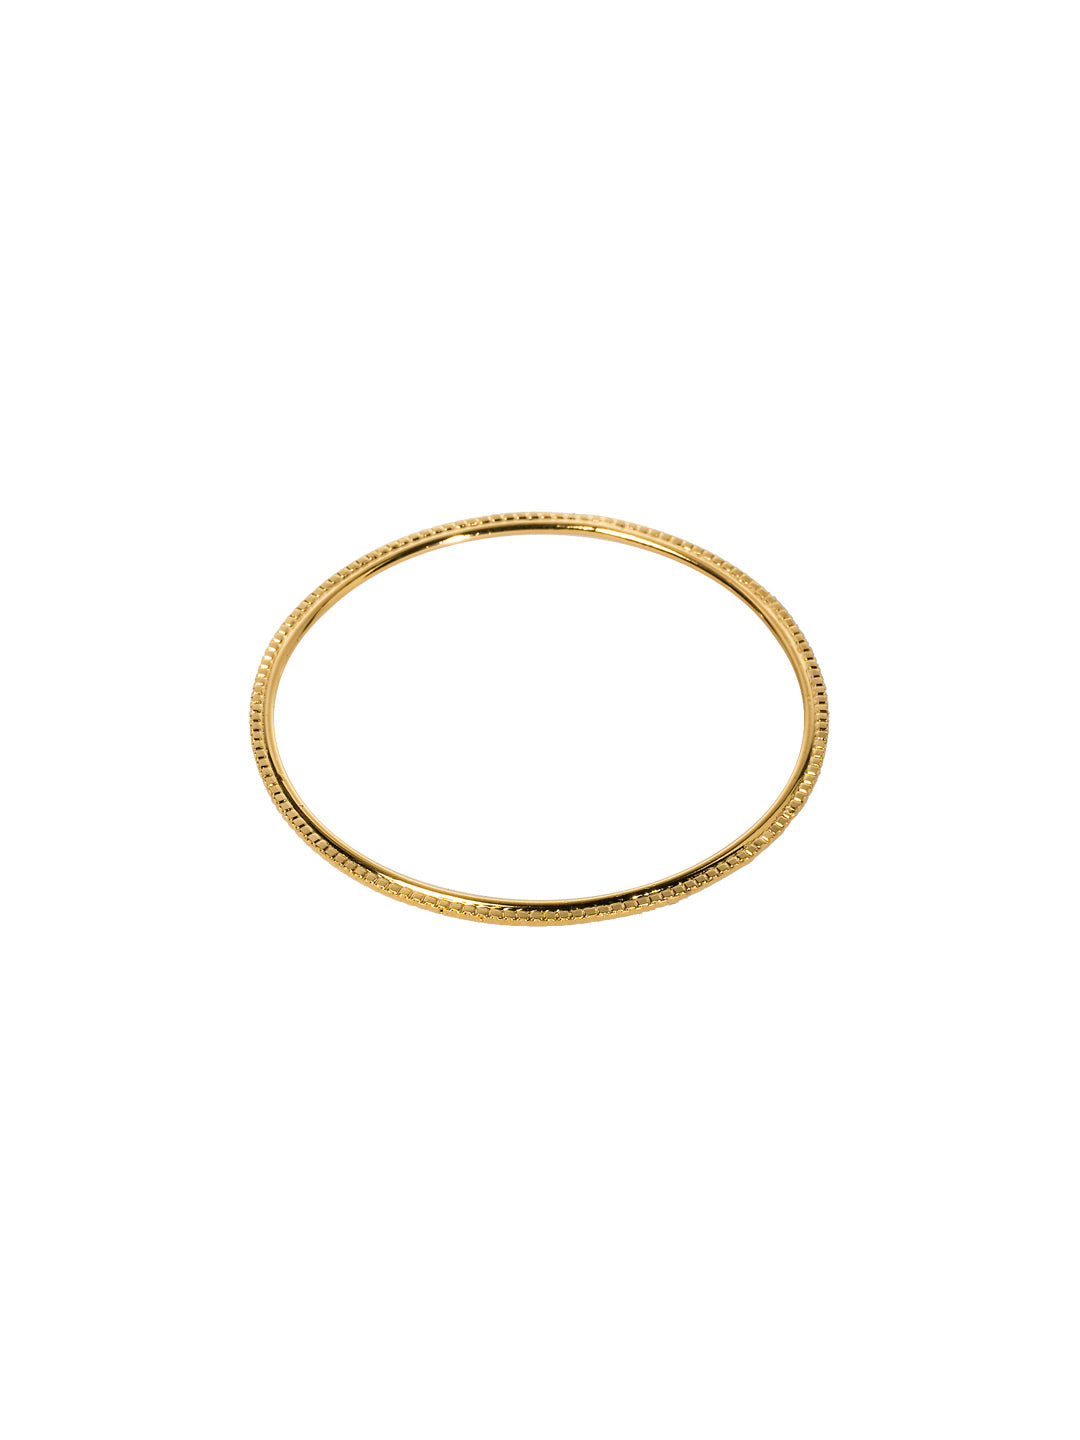 Thin Line Bangle Bracelet - 4BD25BGMTL - <p>From Sorrelli's Bare Metallic collection in our Bright Gold-tone finish.</p>